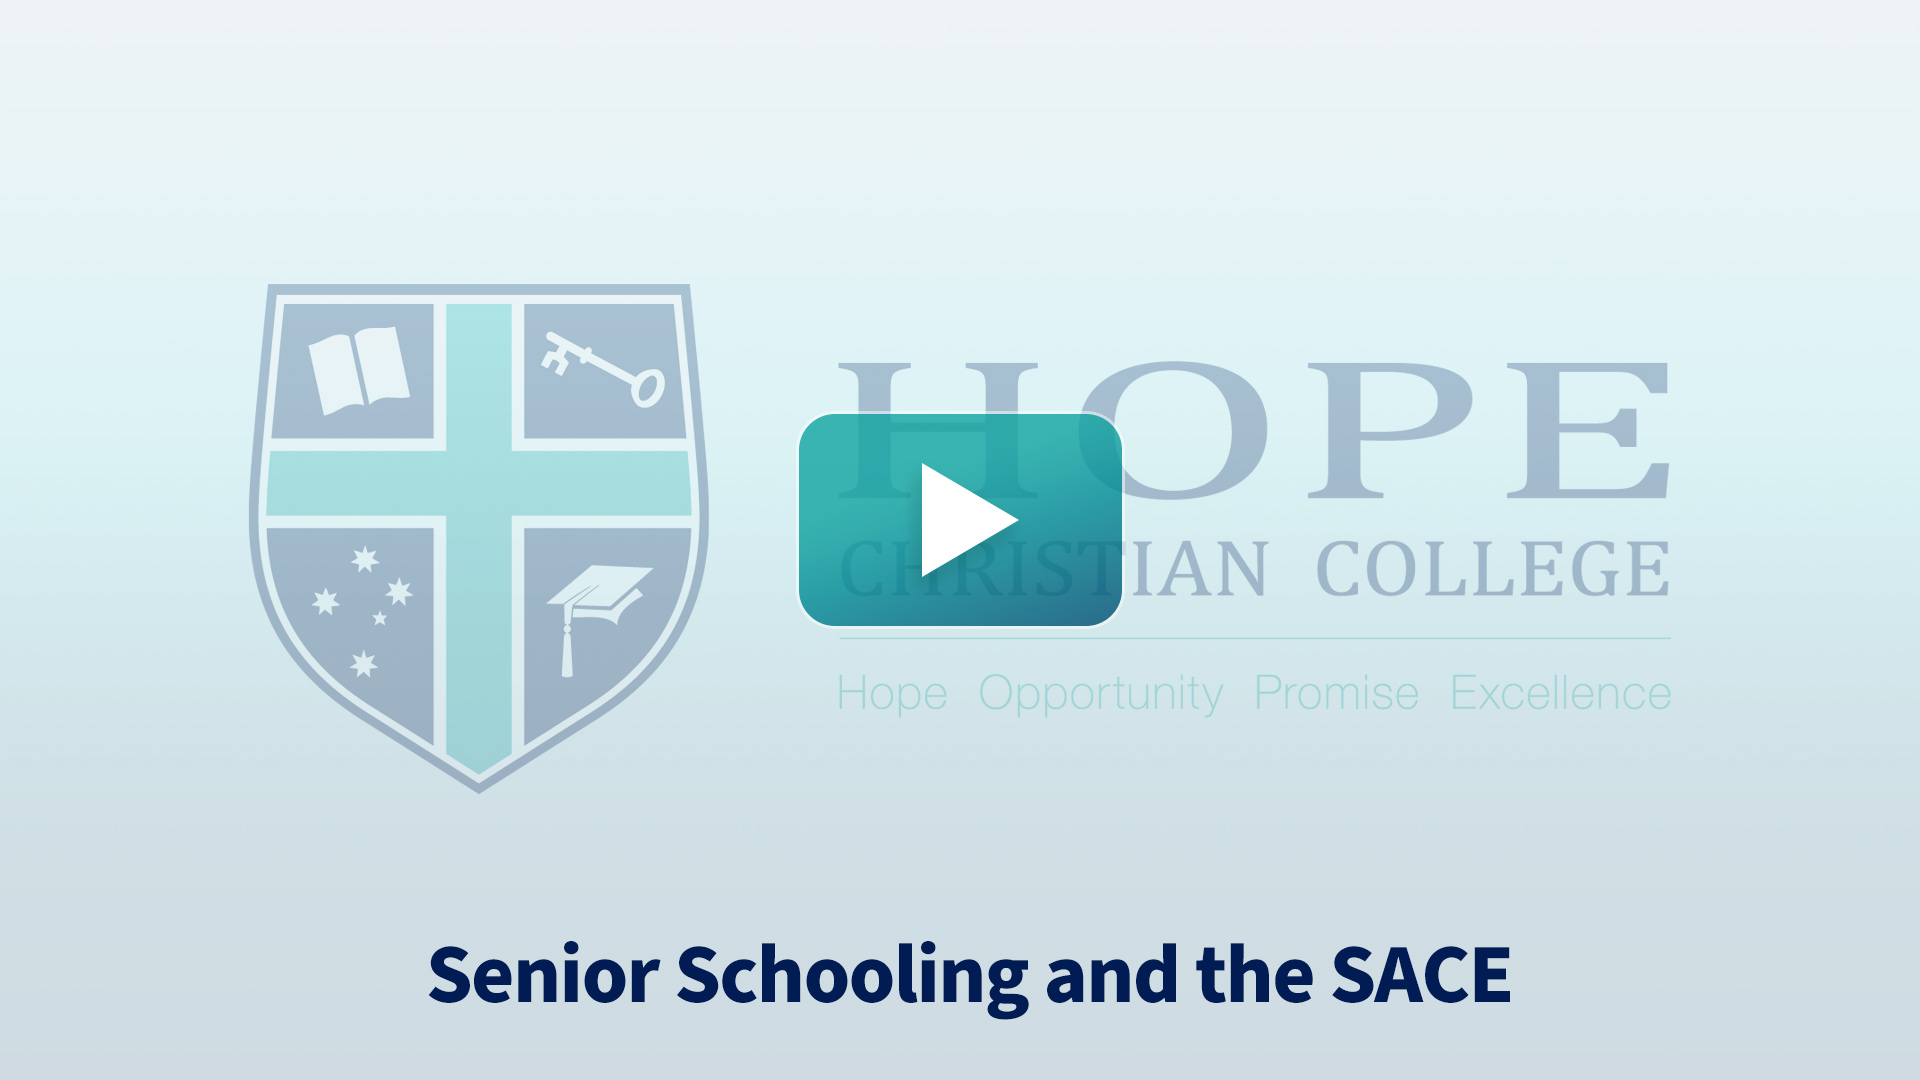 Senior Schooling and the SACE